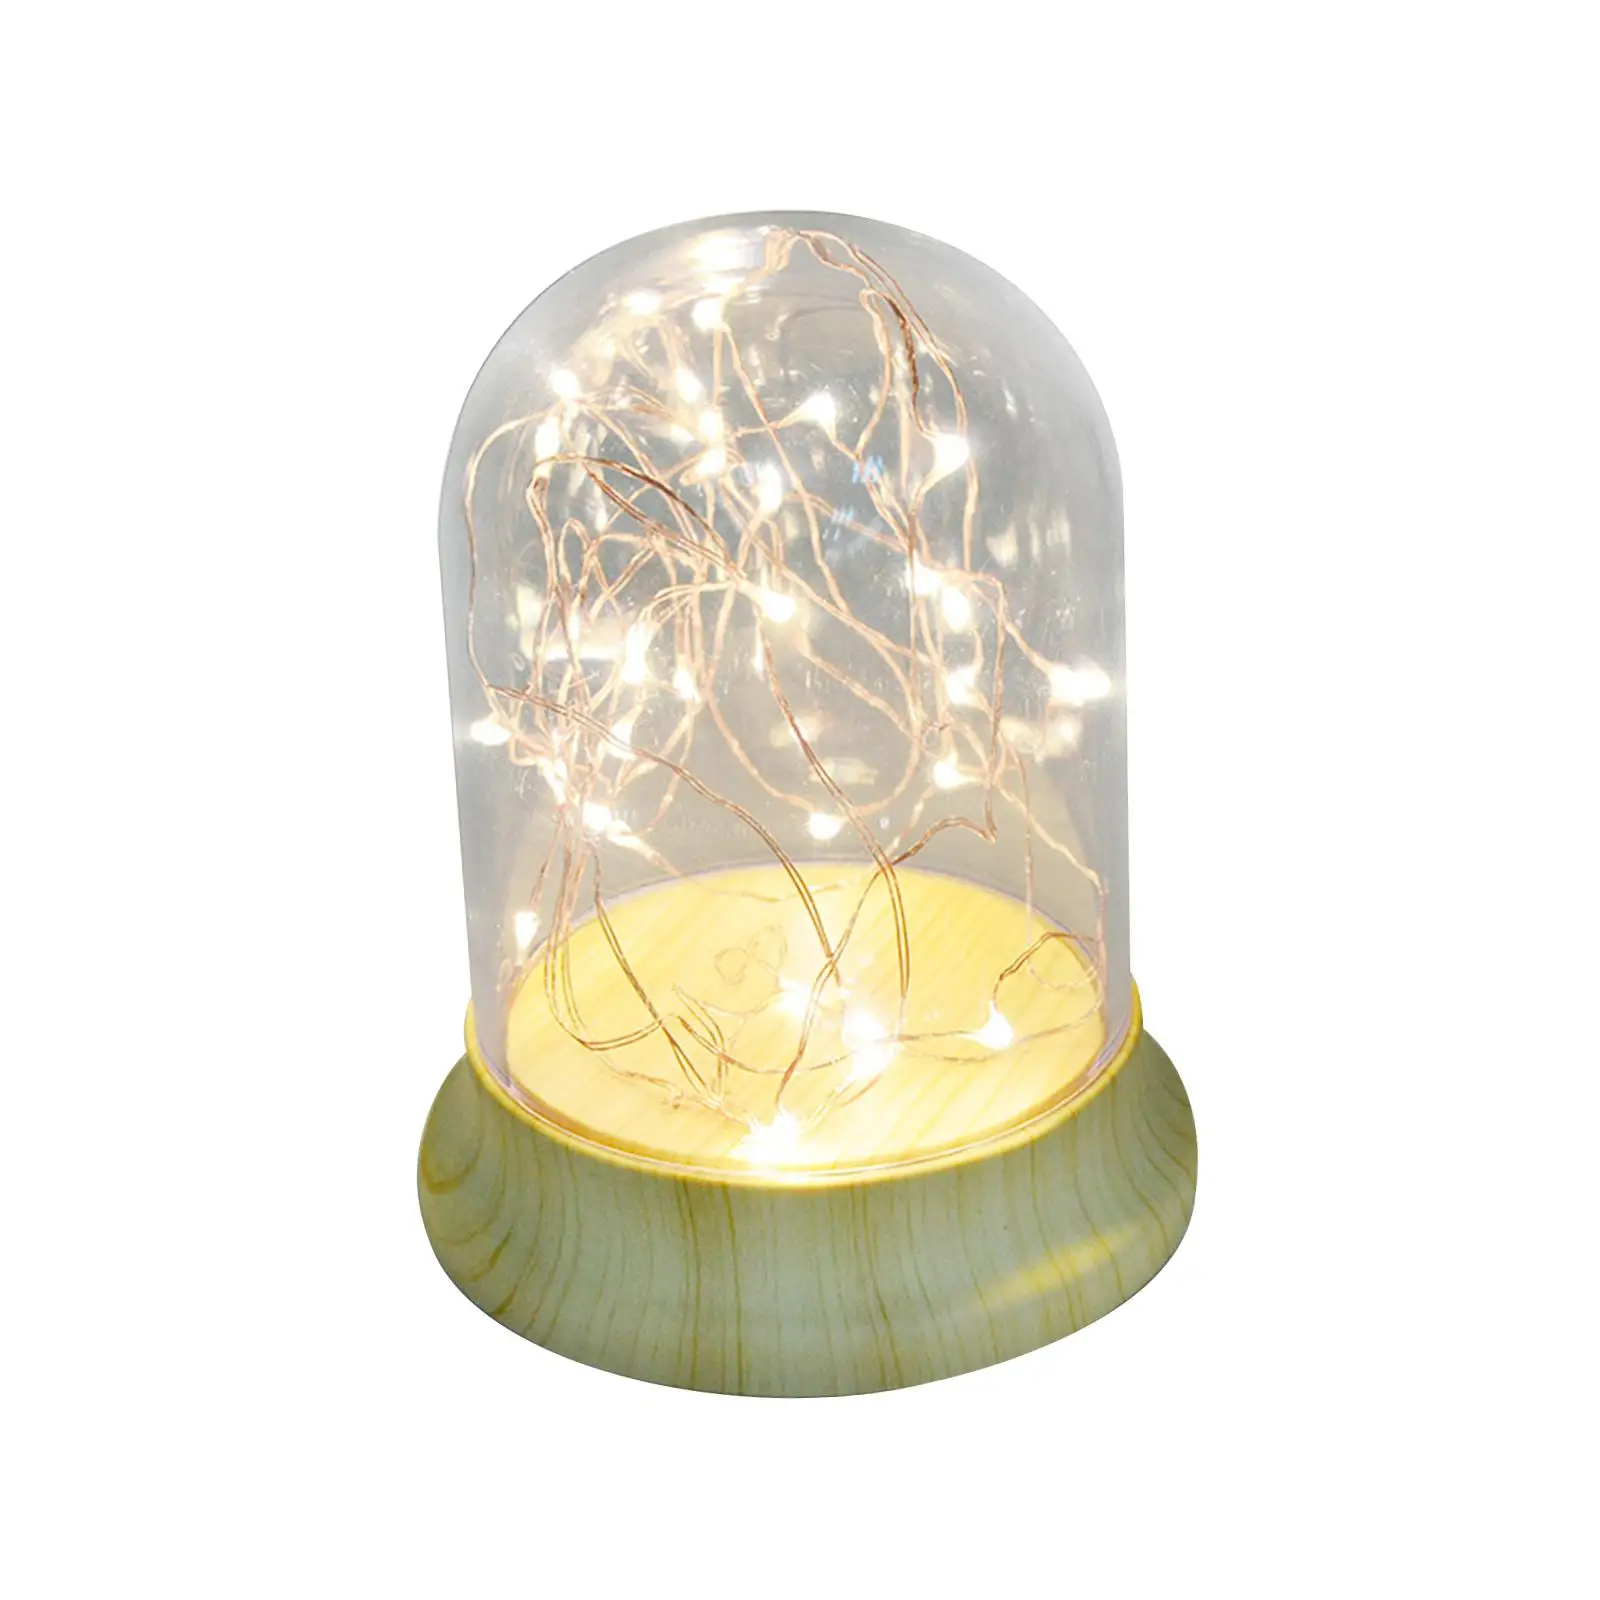 Night Light Handmade DIY Material Package Party Favor NightStand Lamp LED Atmosphere Lamp for Table Centerpieces Decoration Gift